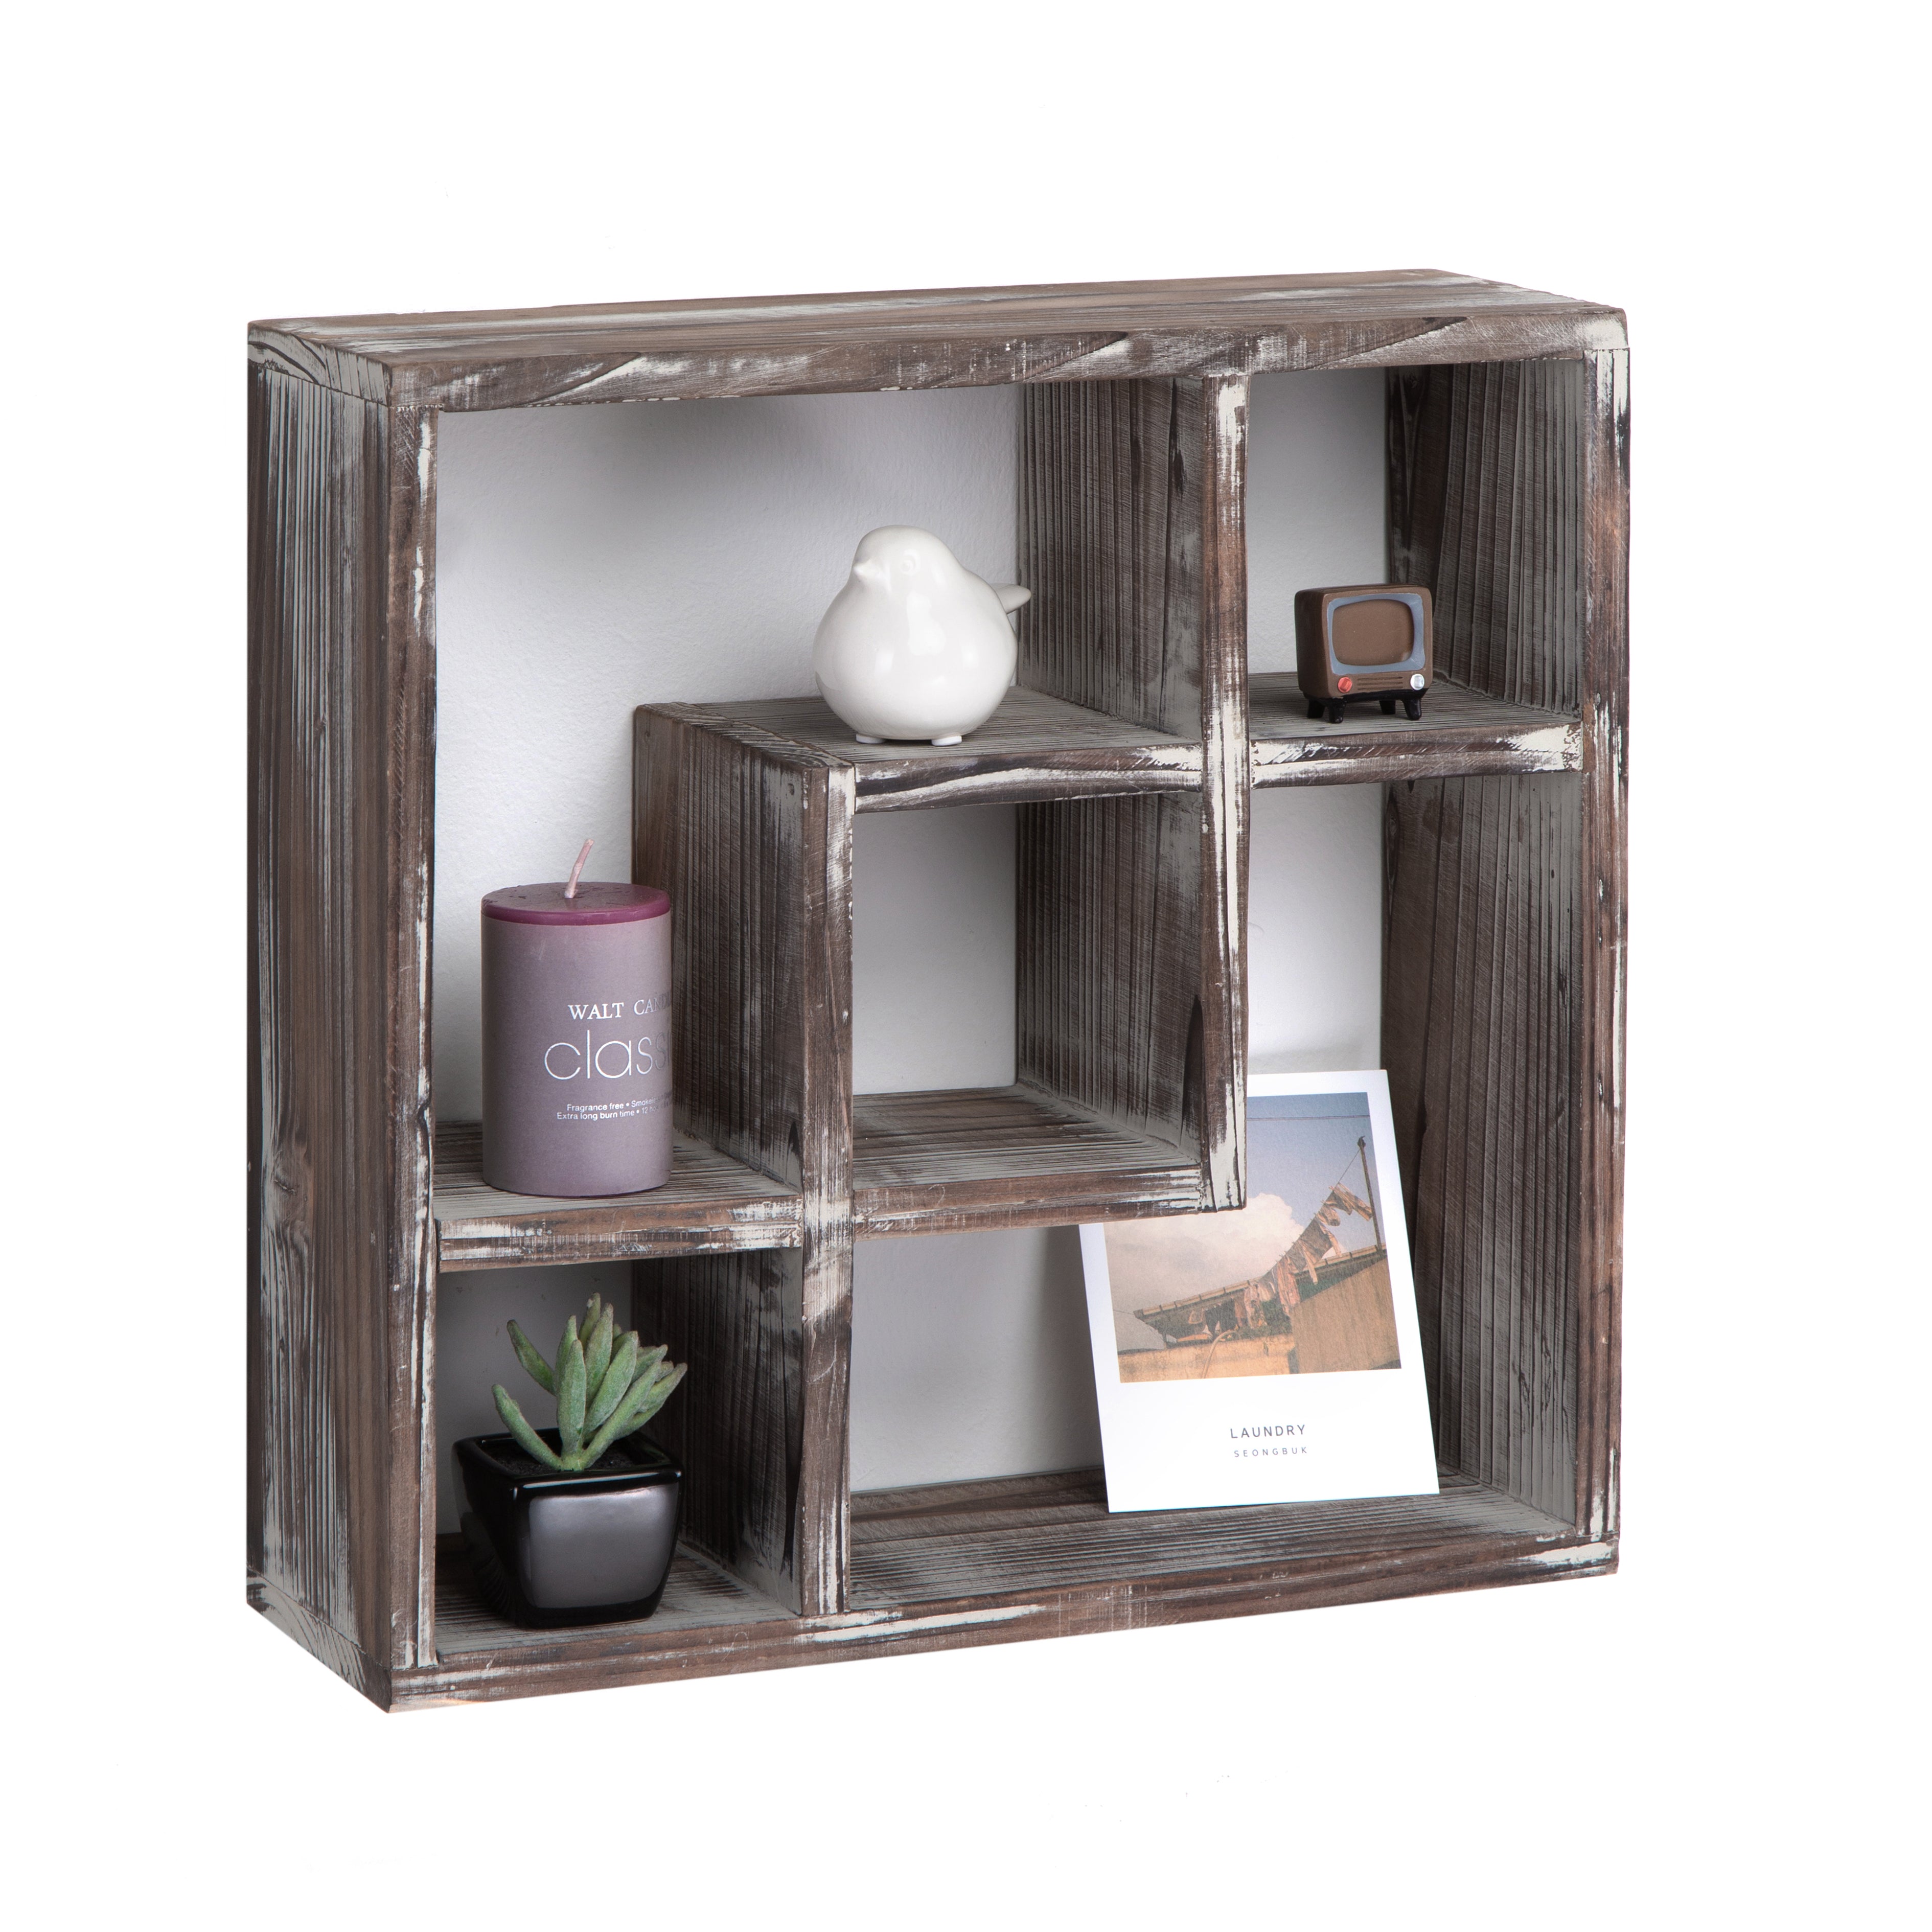 12 Compartment Freestanding or Wall Mounted Shadow Box / Display